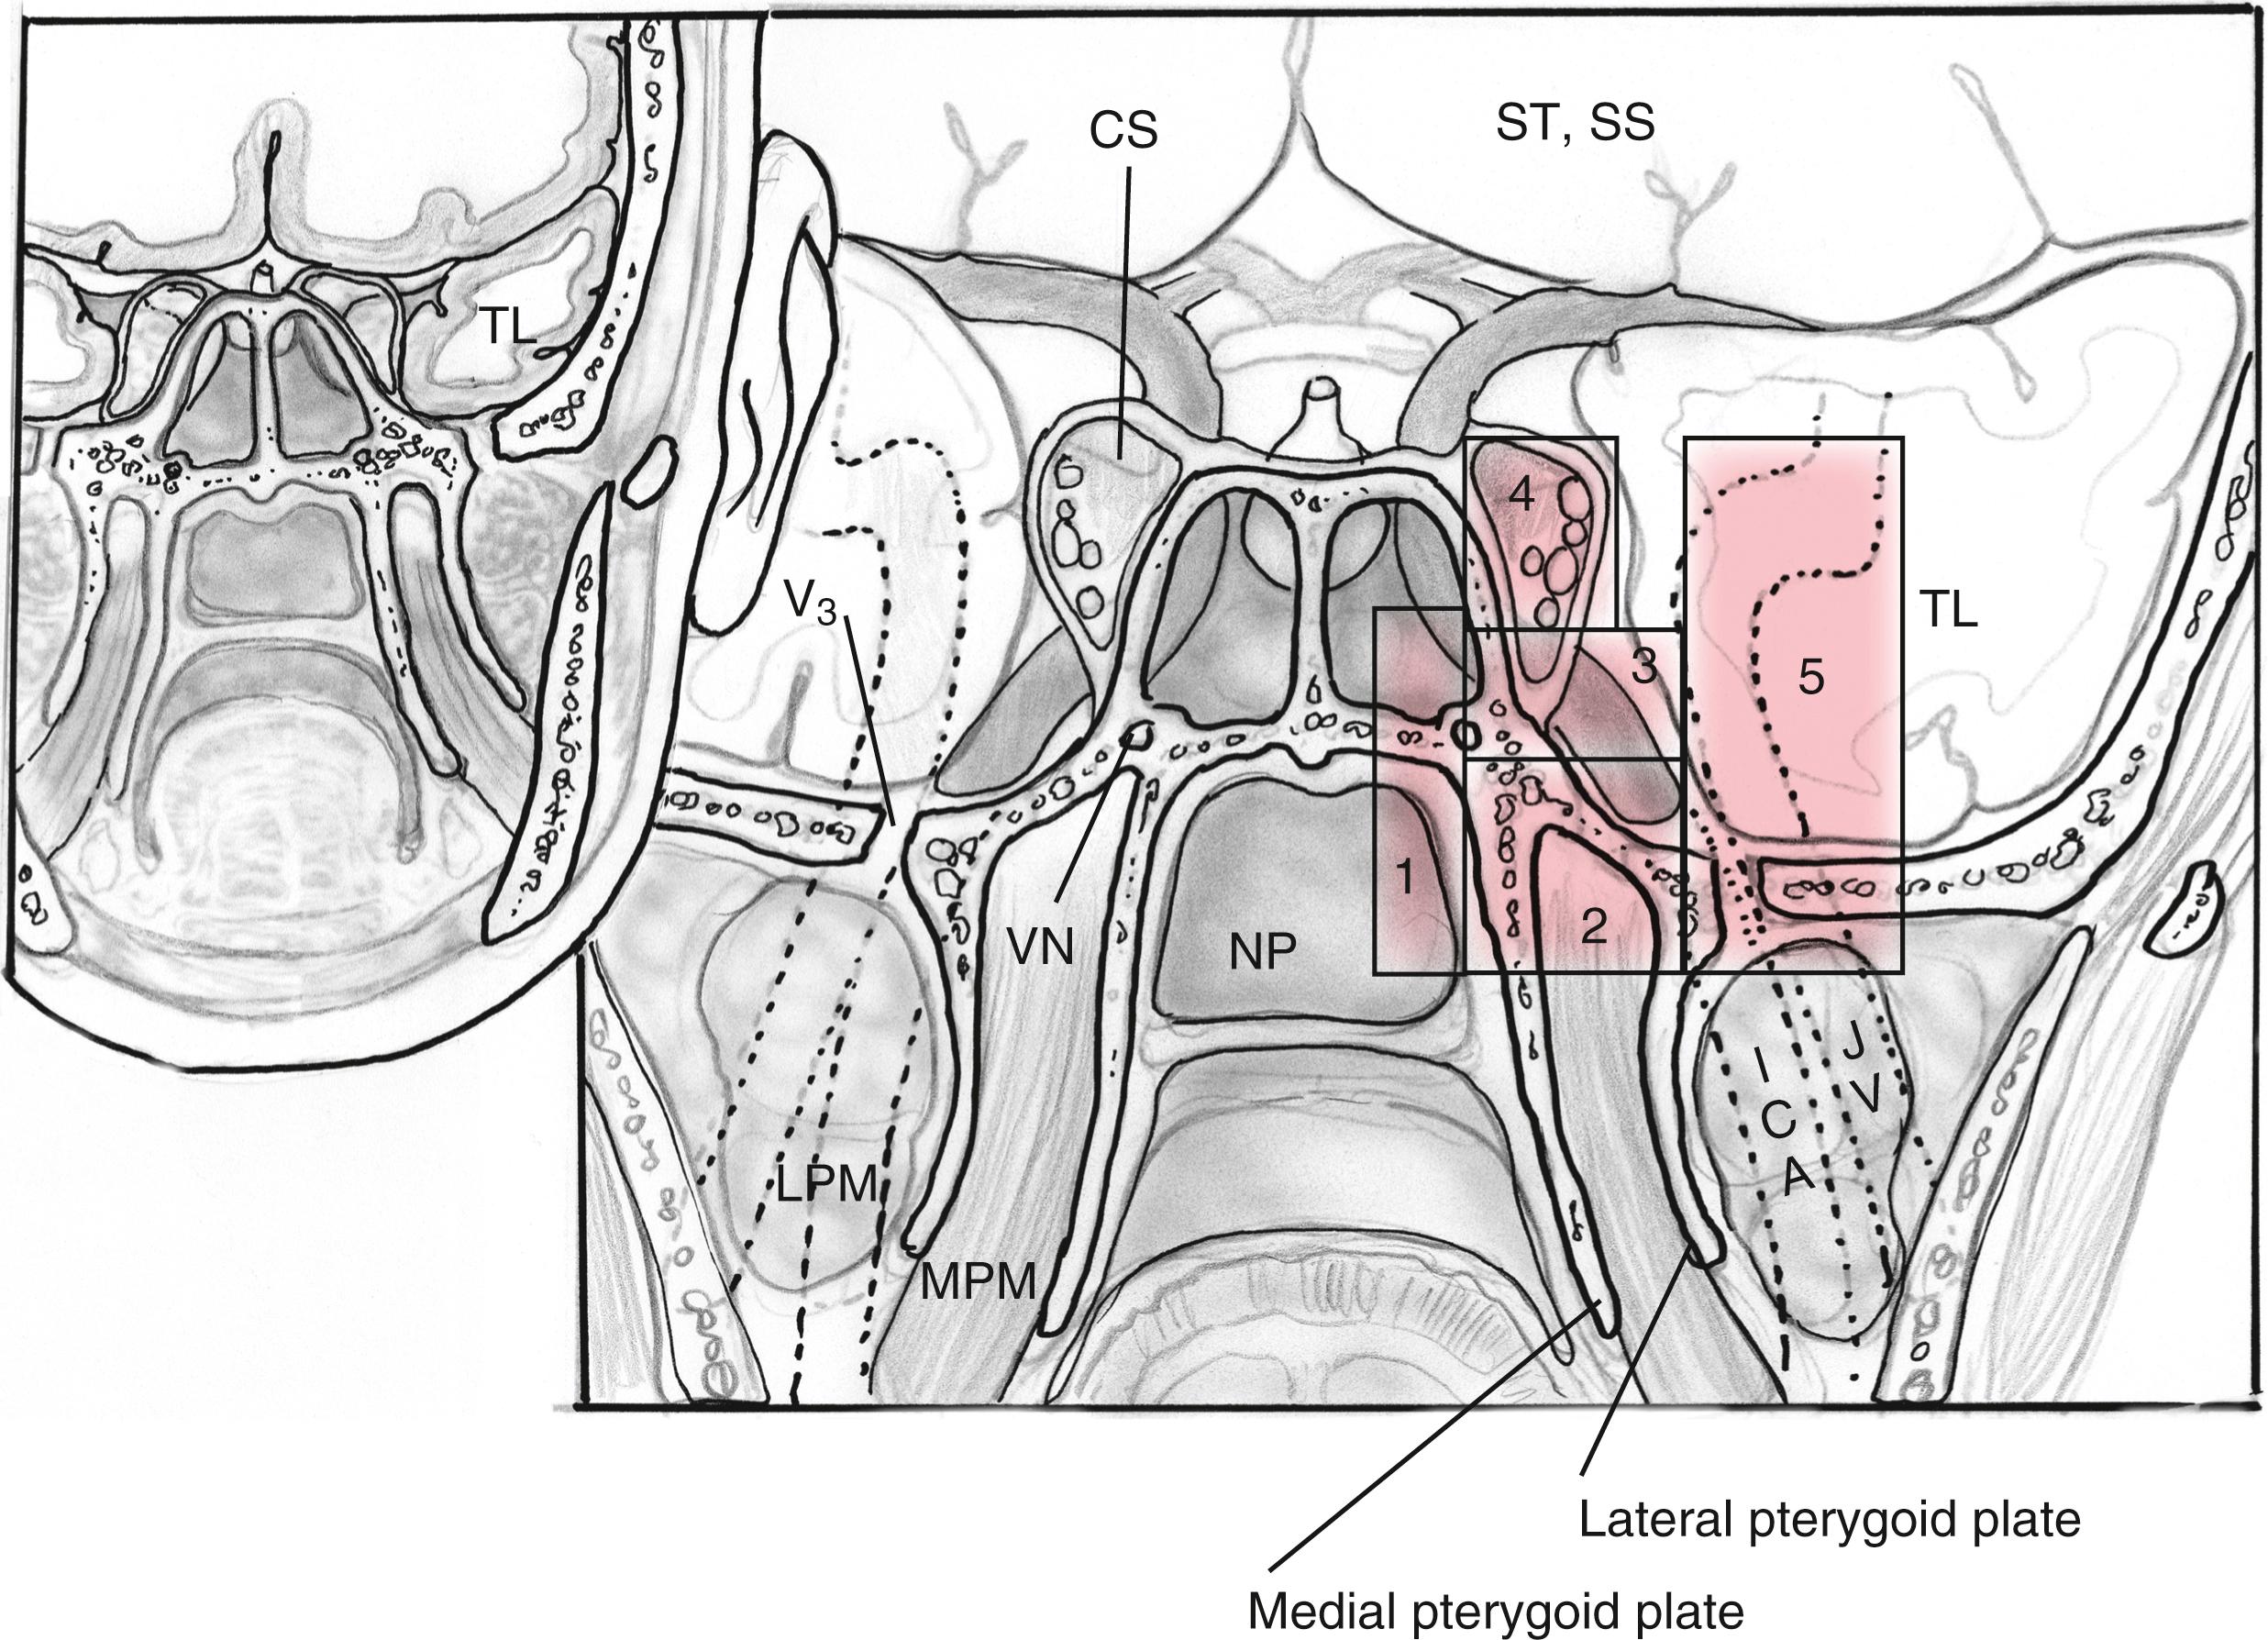 Fig. 50.3, Coronal plane, lateral expanded endonasal approaches by anatomical zones. Zone 1 is the petrous apex, zone 2 the petroclival junction, zone 3 is the quadrangular space/Meckel cave, zone 4 is the superior lateral cavernous sinus, and zone 5 is the infratemporal fossa. CS , Cavernous sinus; ICA , internal carotid artery; JV , jugular vein; NP , nasopharynx; LPM/MPM, lateral and medial pterygoid muscles; SS , sphenoid sinus; ST, sella turcica; TL , temporal lobe; VN , vidian nerve; V 3 , V 3 in foramen ovale.